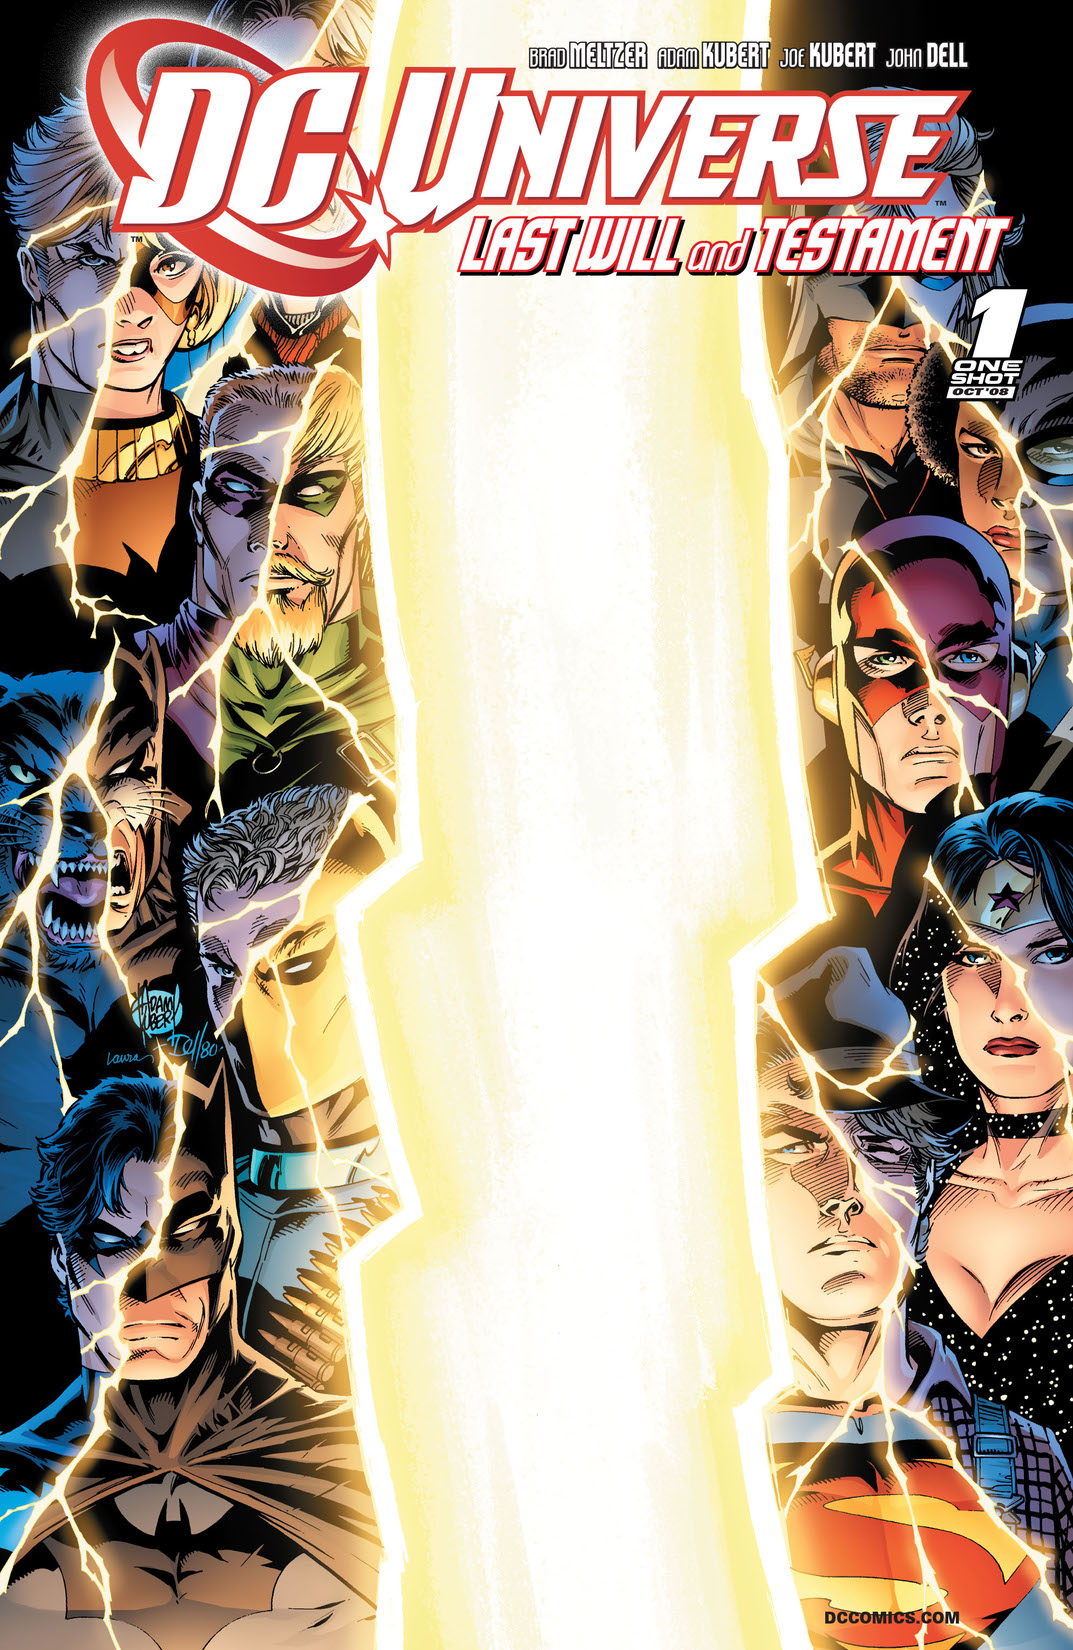 DC Universe: Last Will and Testament #1 preview images